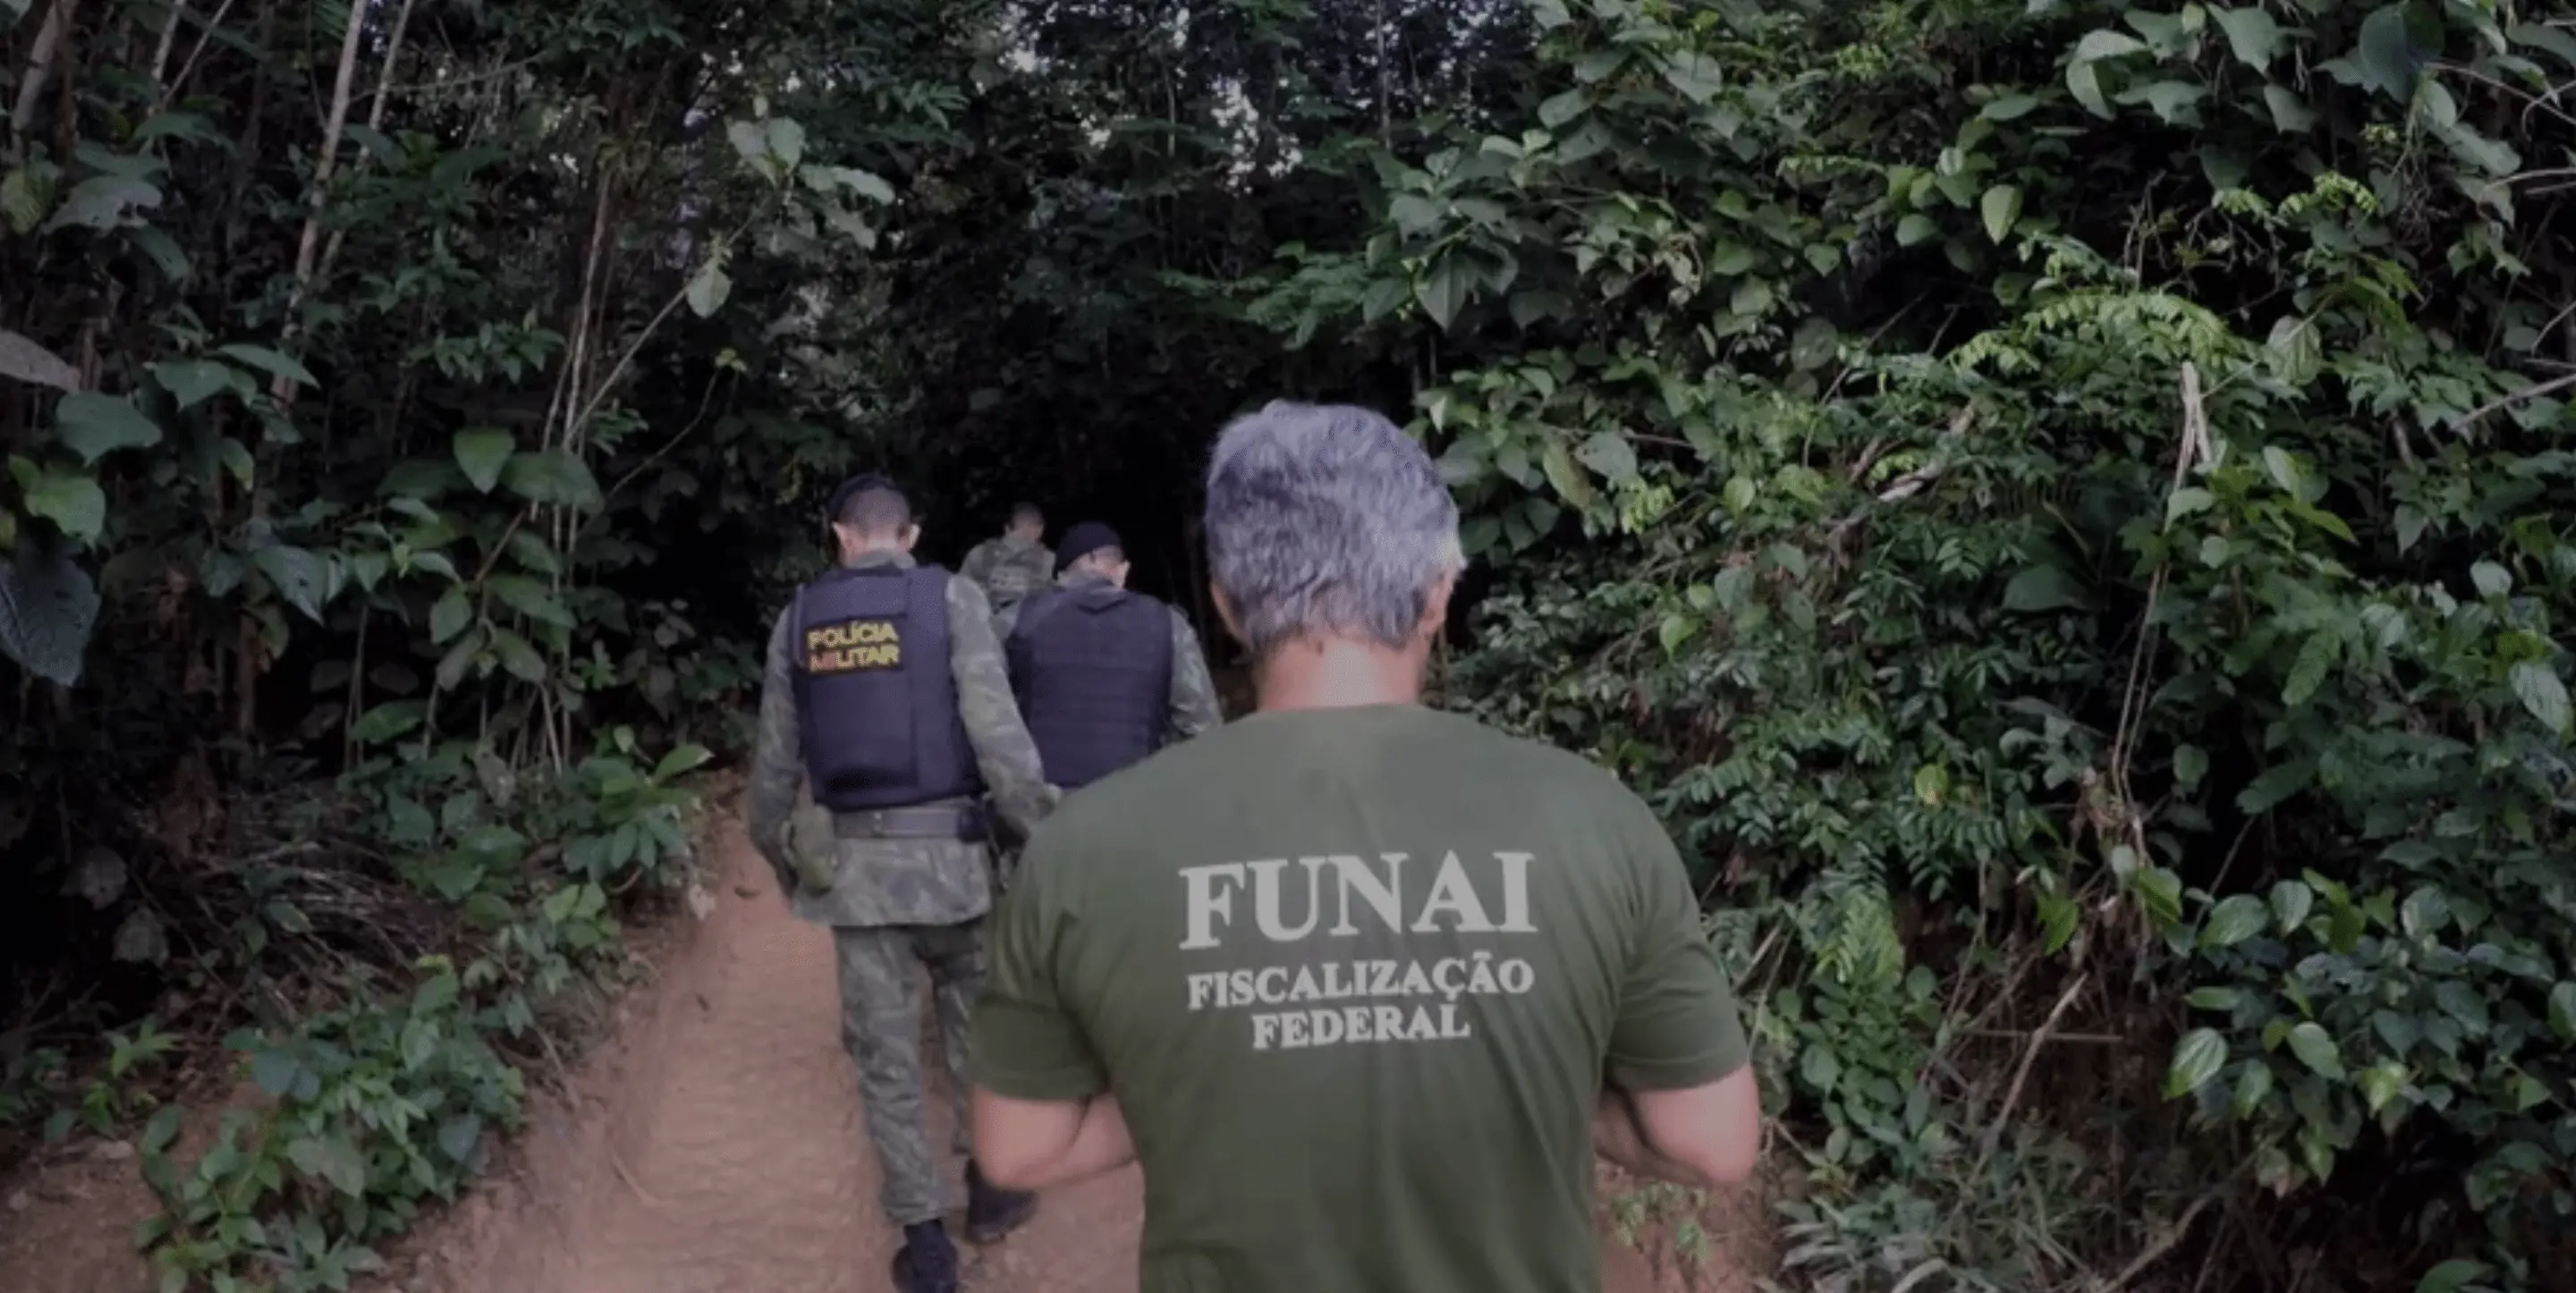 Men in uniform walk into the rainforest; one wears a FUNAI shirt while others are in police gear.